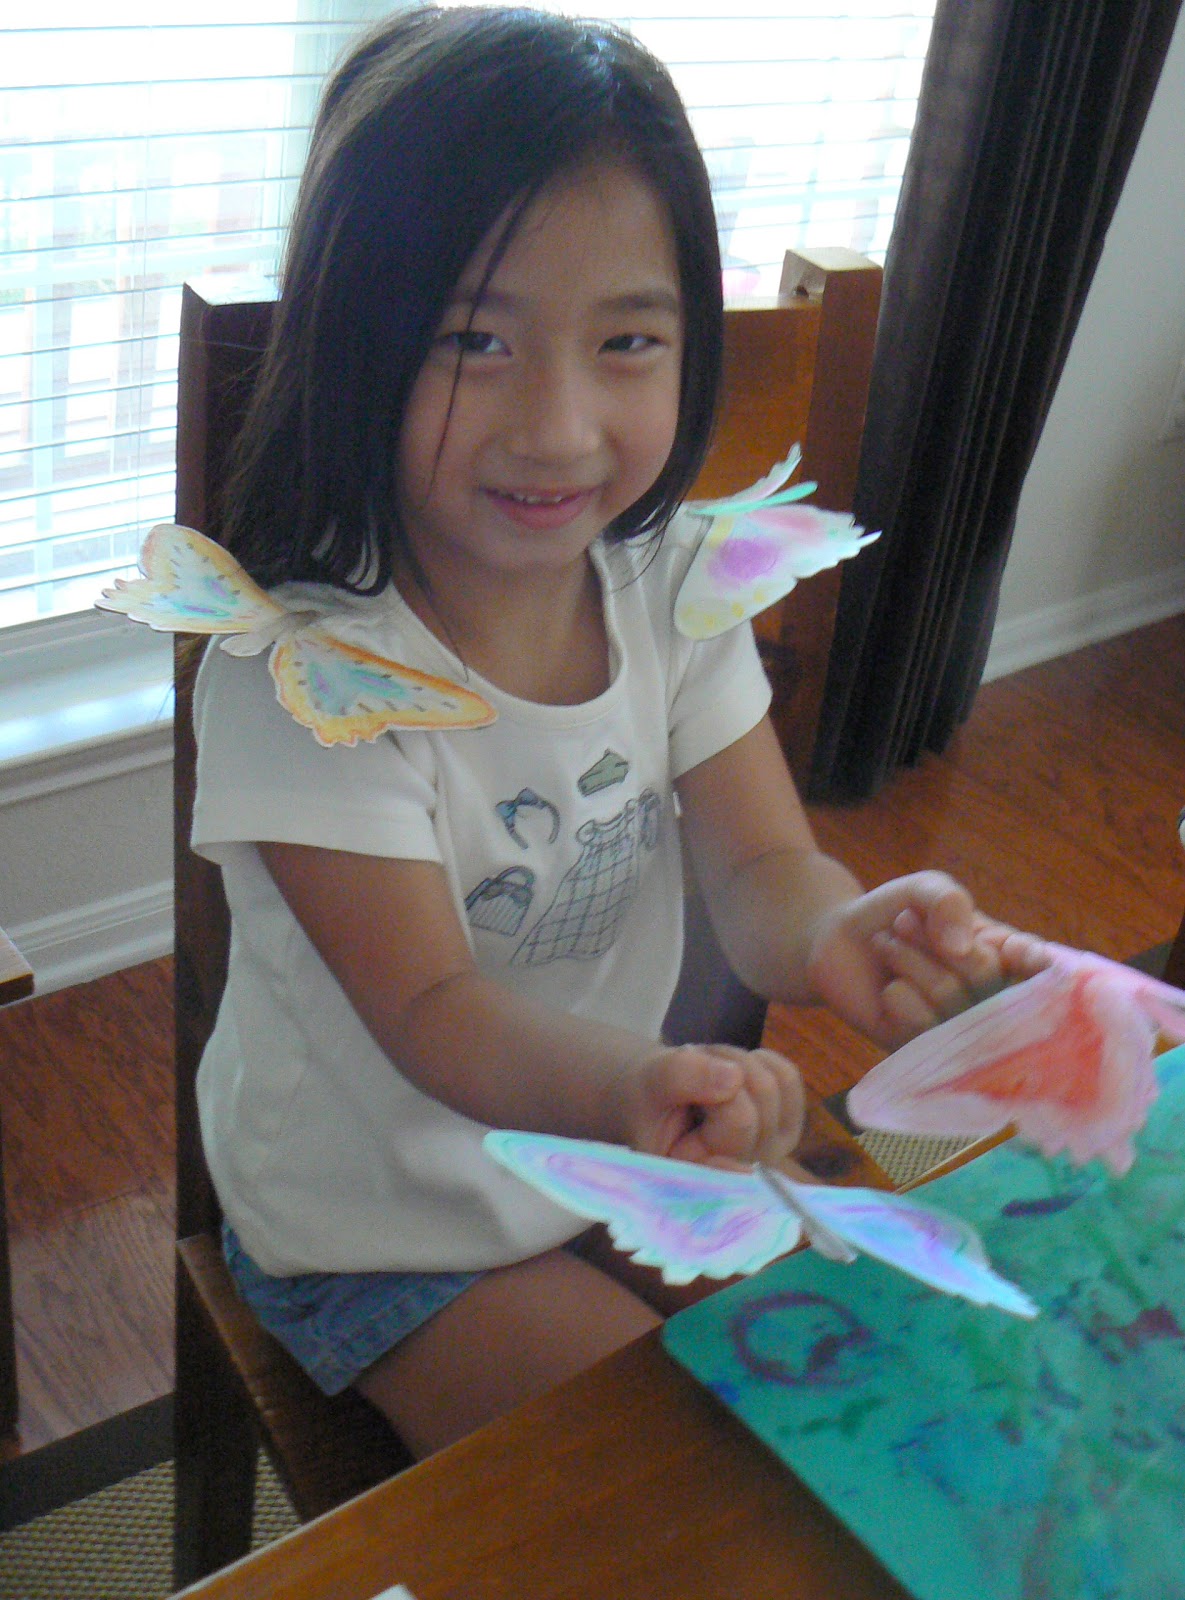 Having Fun at Home: Amazing Balancing Butterfly Craft